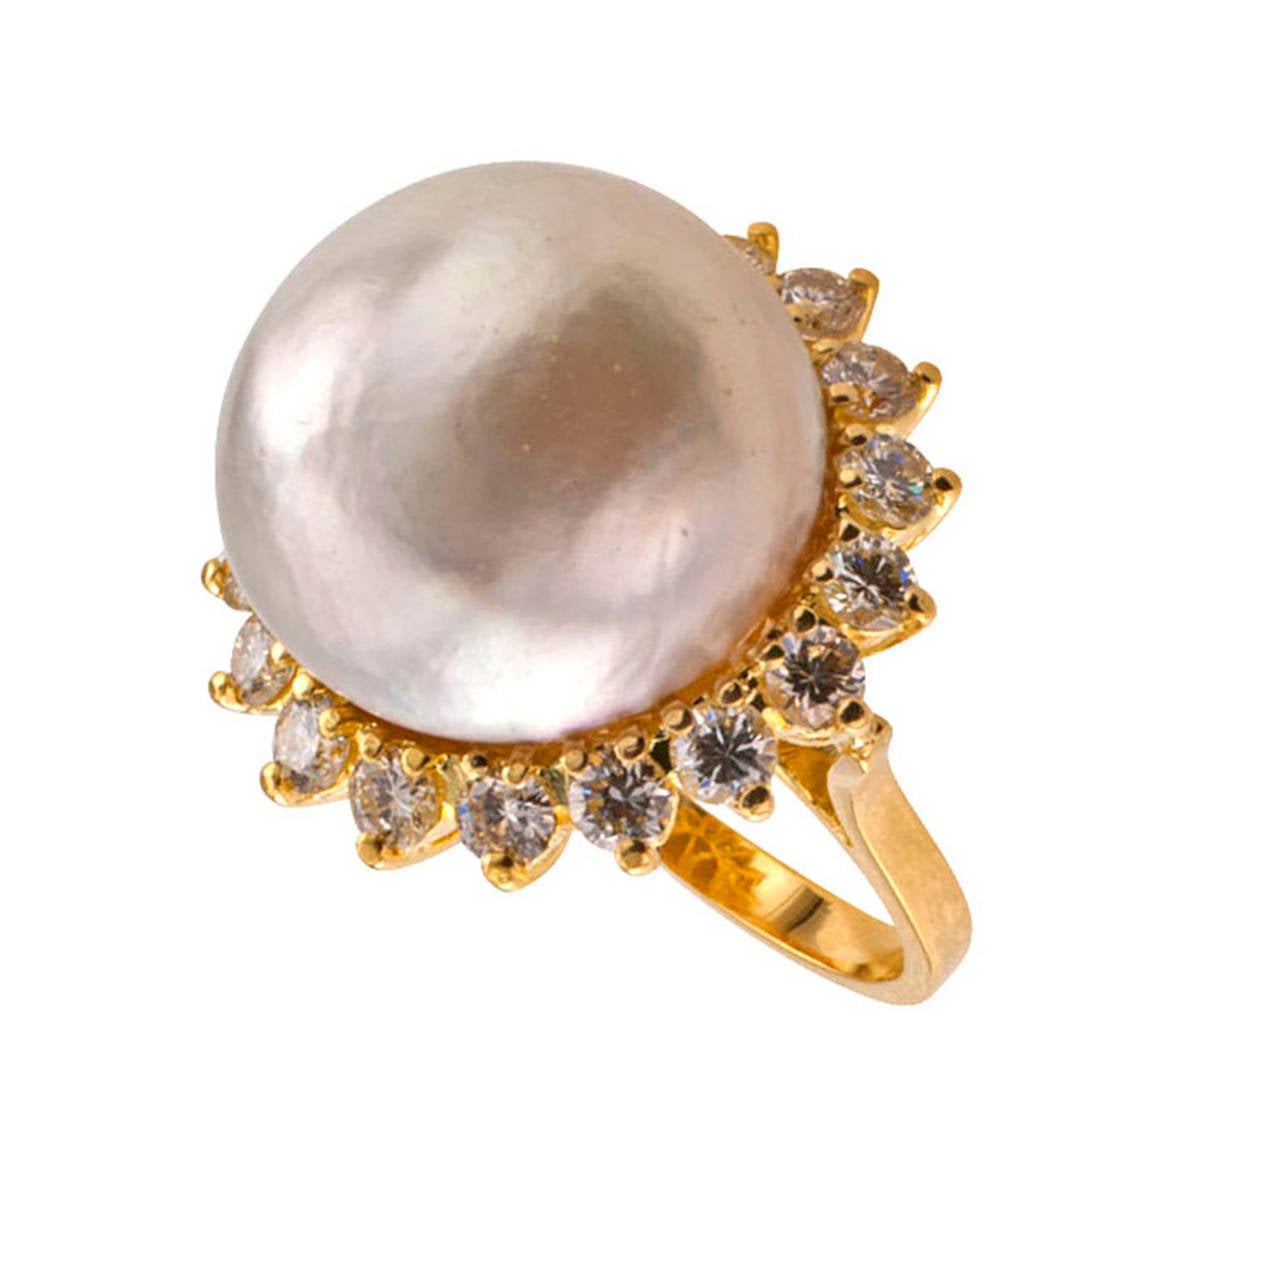 Baroque South Sea Pearl Diamond Gold Ring For Sale at 1stdibs